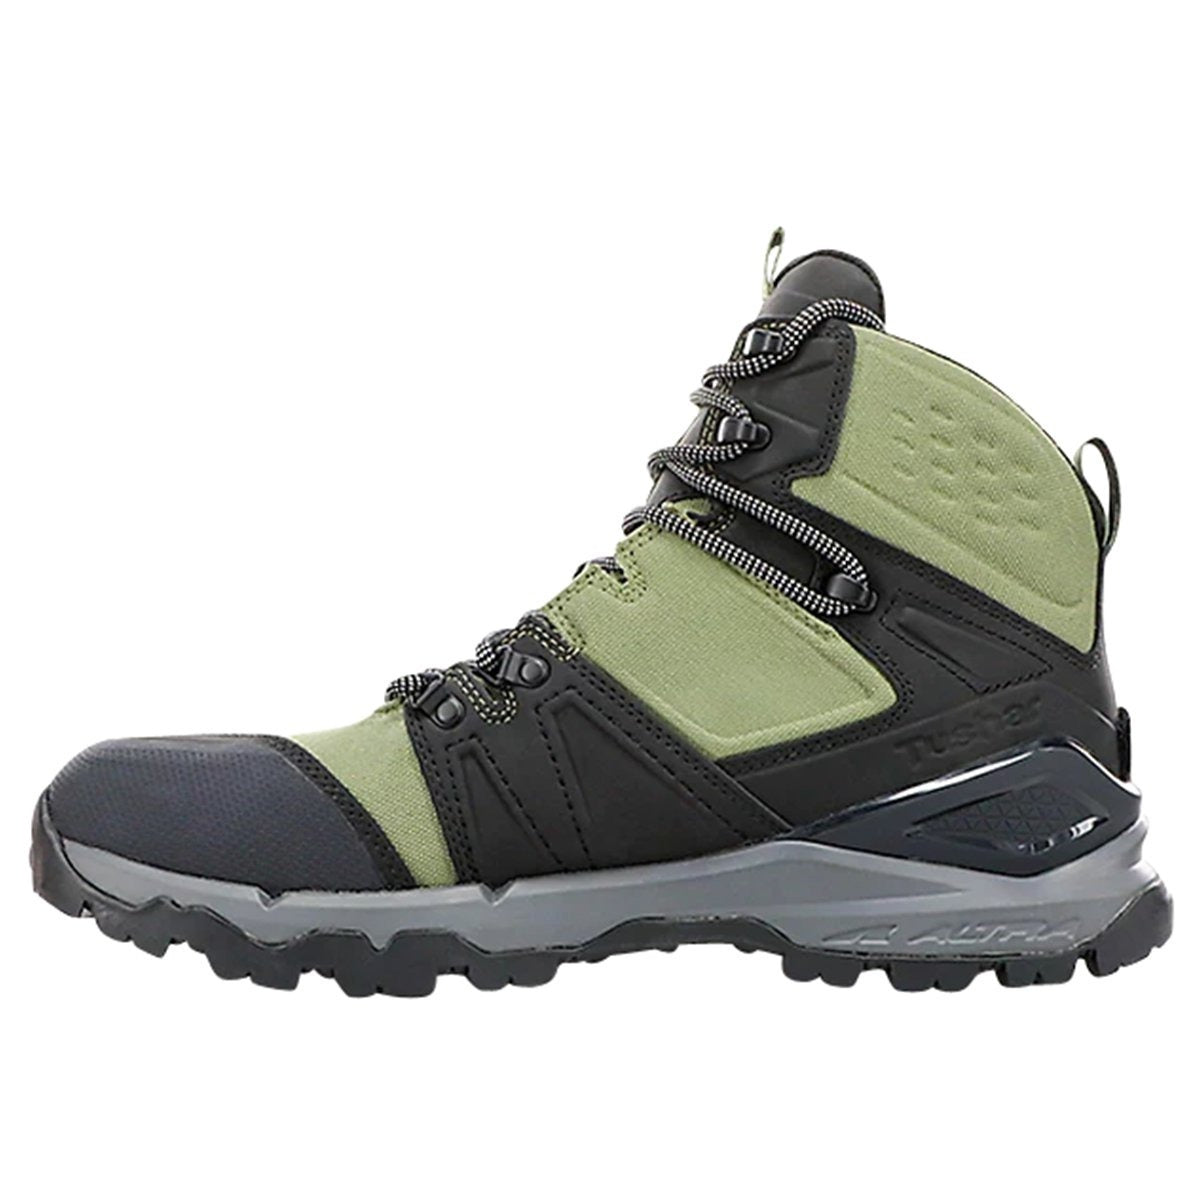 Altra Tushar in Altra Tushar Boot by Altra | Footwear - goHUNT Shop by GOHUNT | Altra - GOHUNT Shop